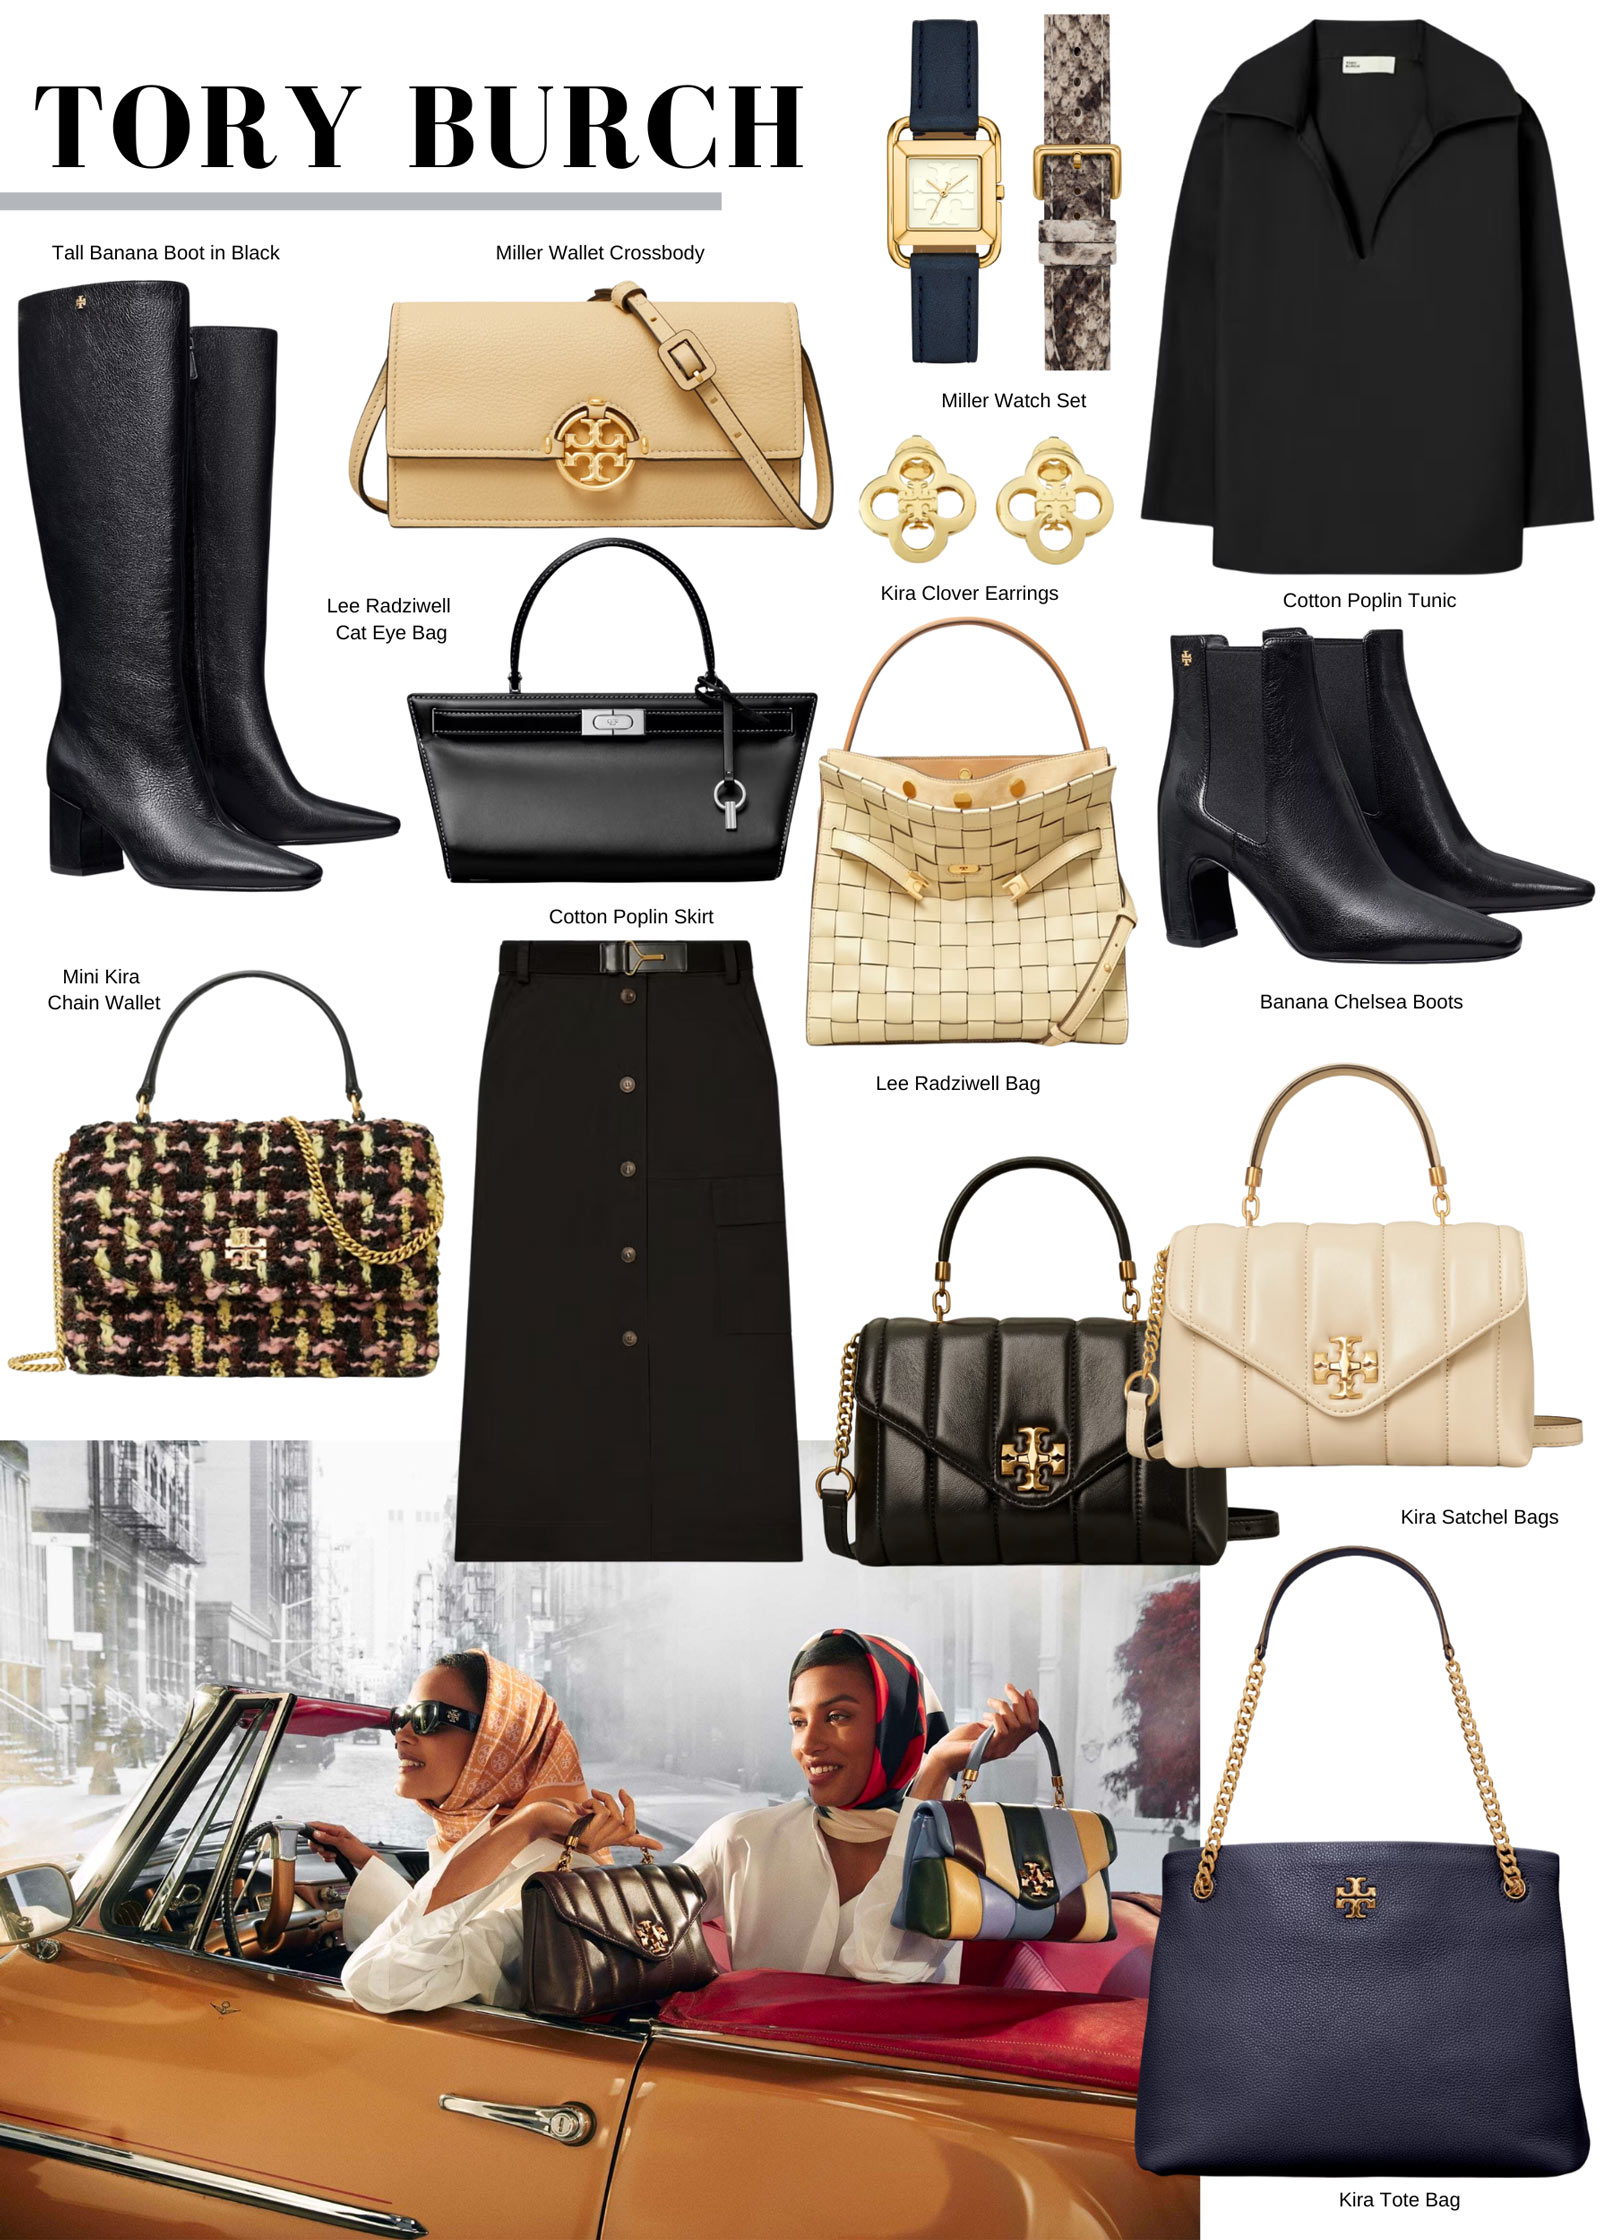 Tory Burch: Save big on purses, shoes, and clothing for spring - Reviewed